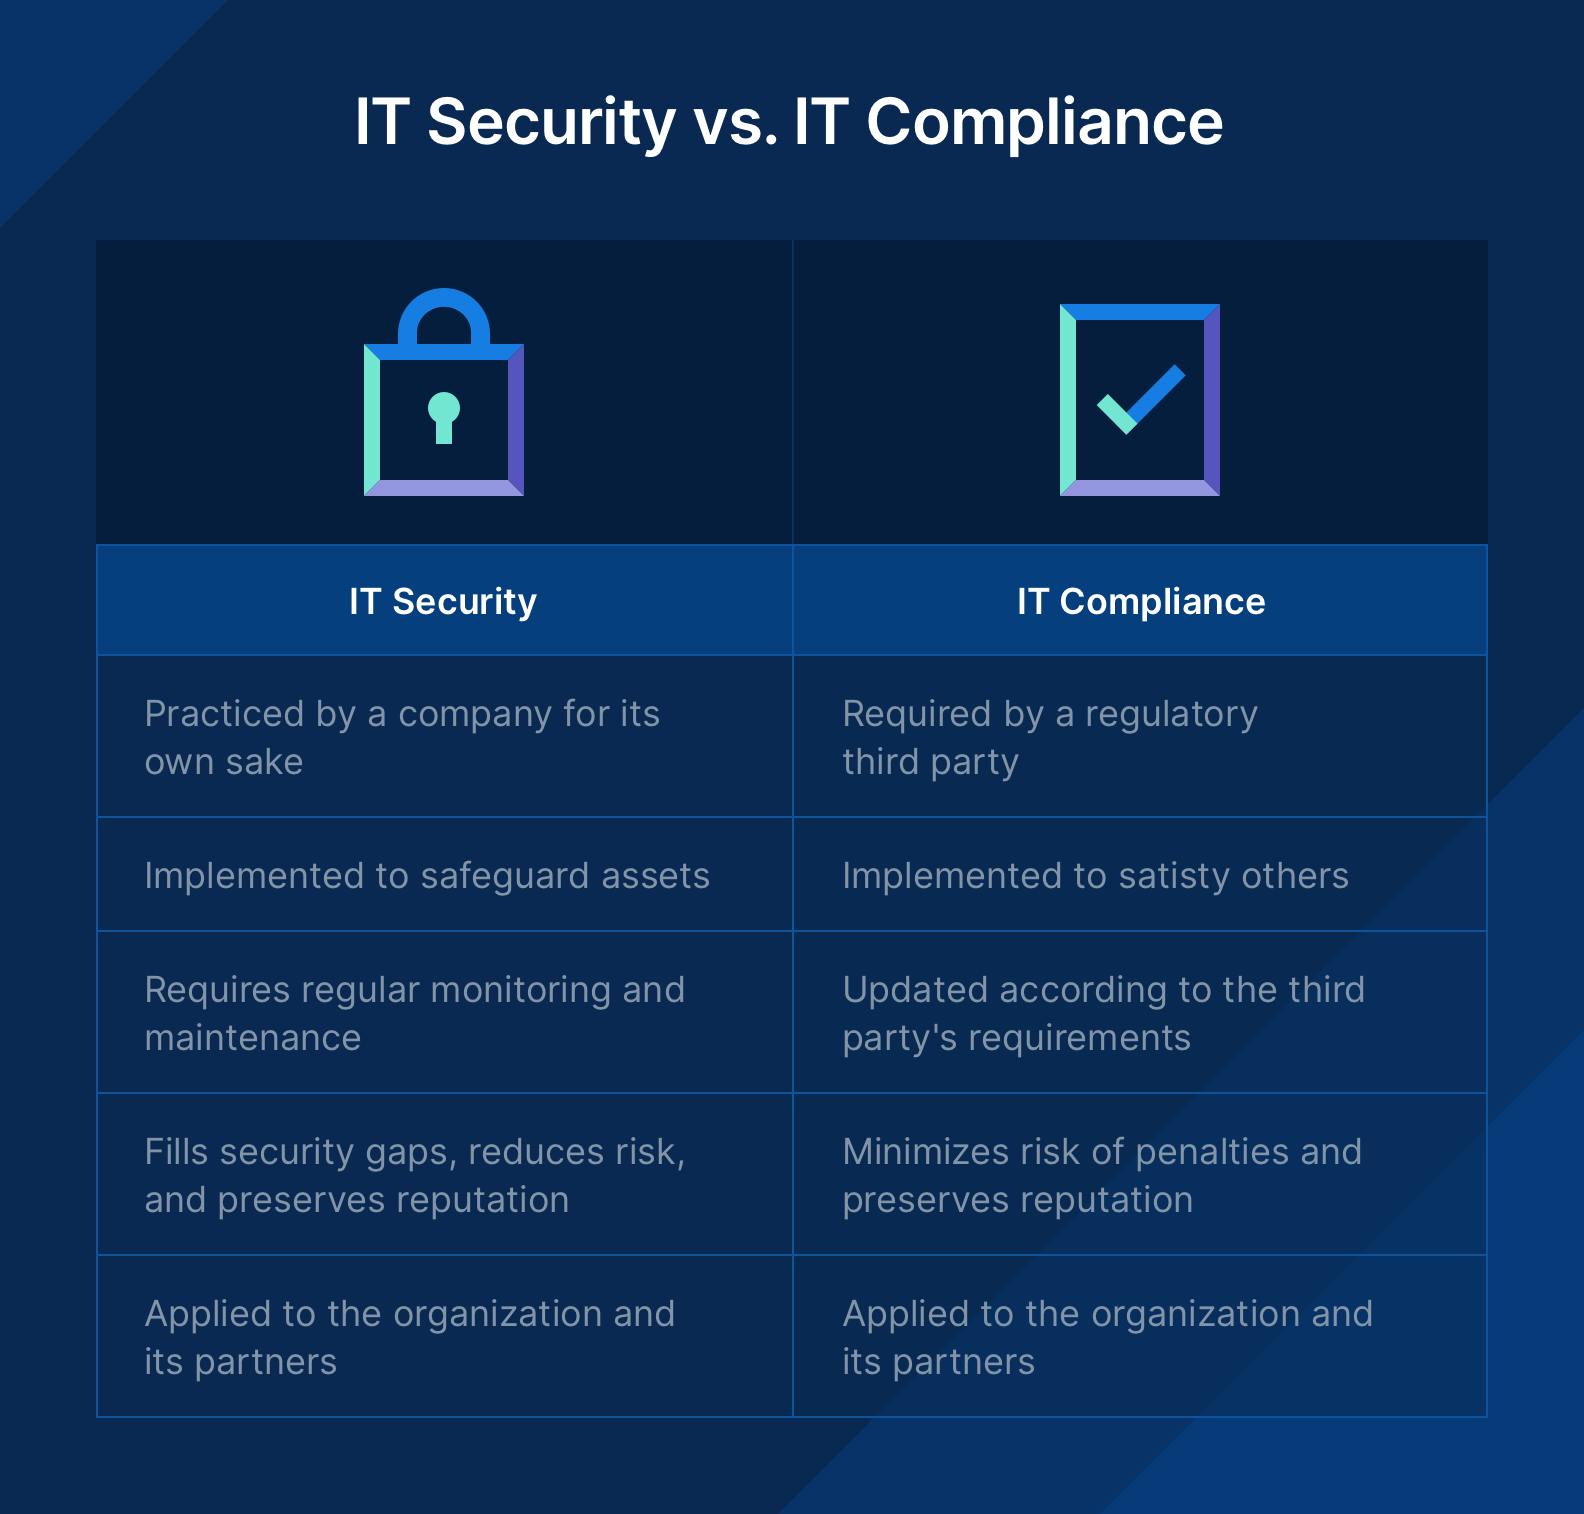 IT security vs IT compliance chart showing difference in why they're implemented, what's required, and how they're applied